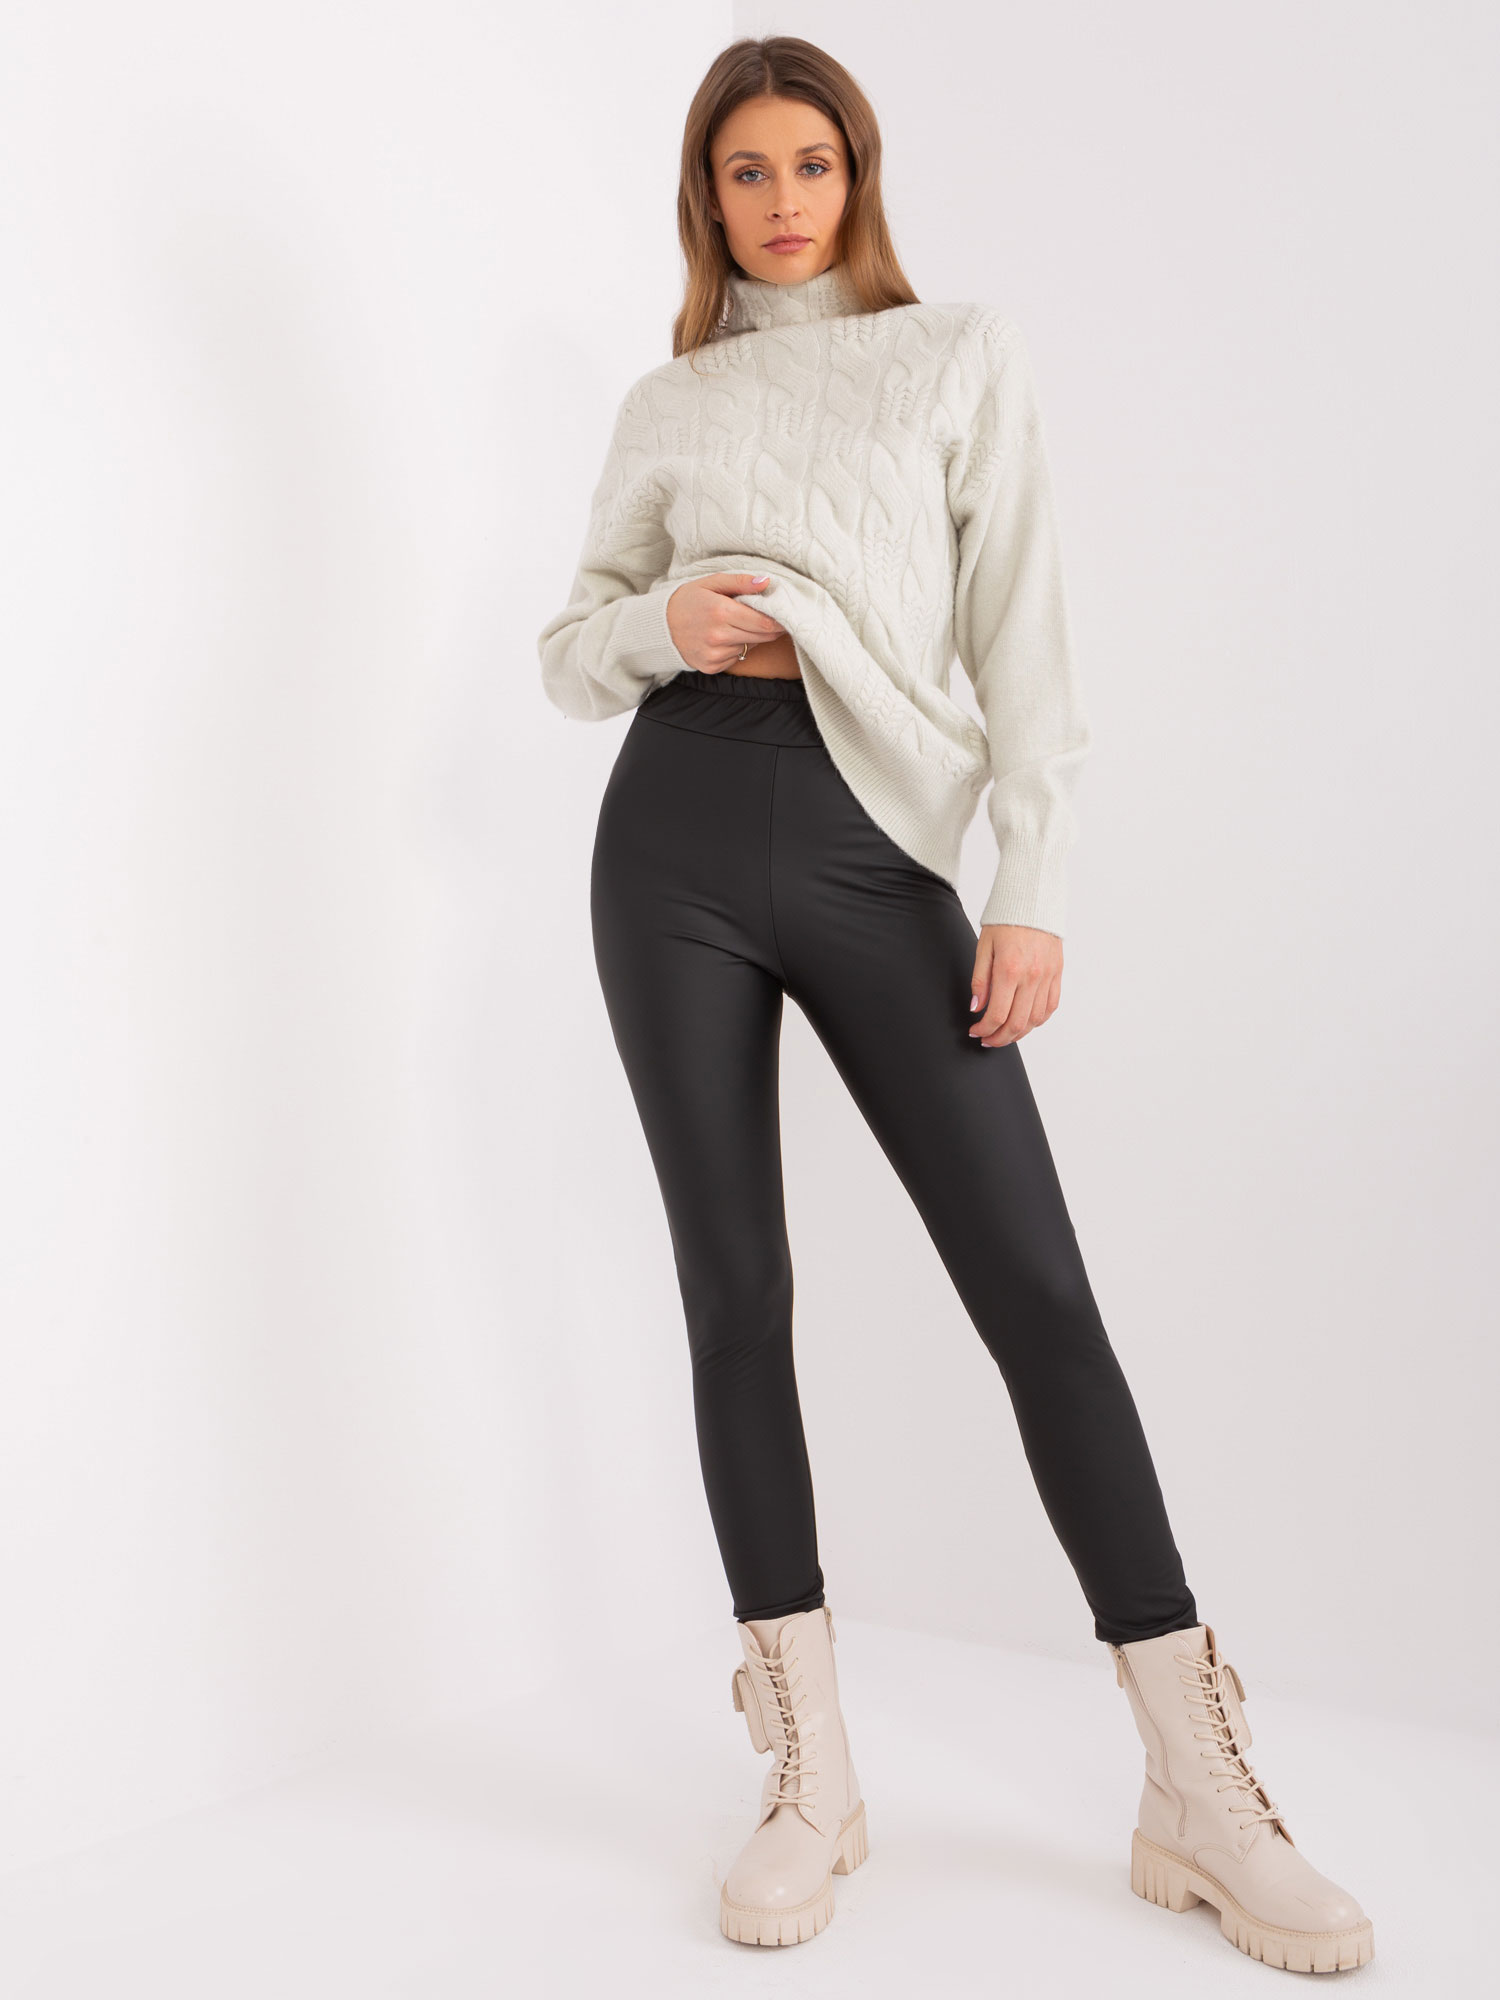 Black leggings made of eco-leather with insulation